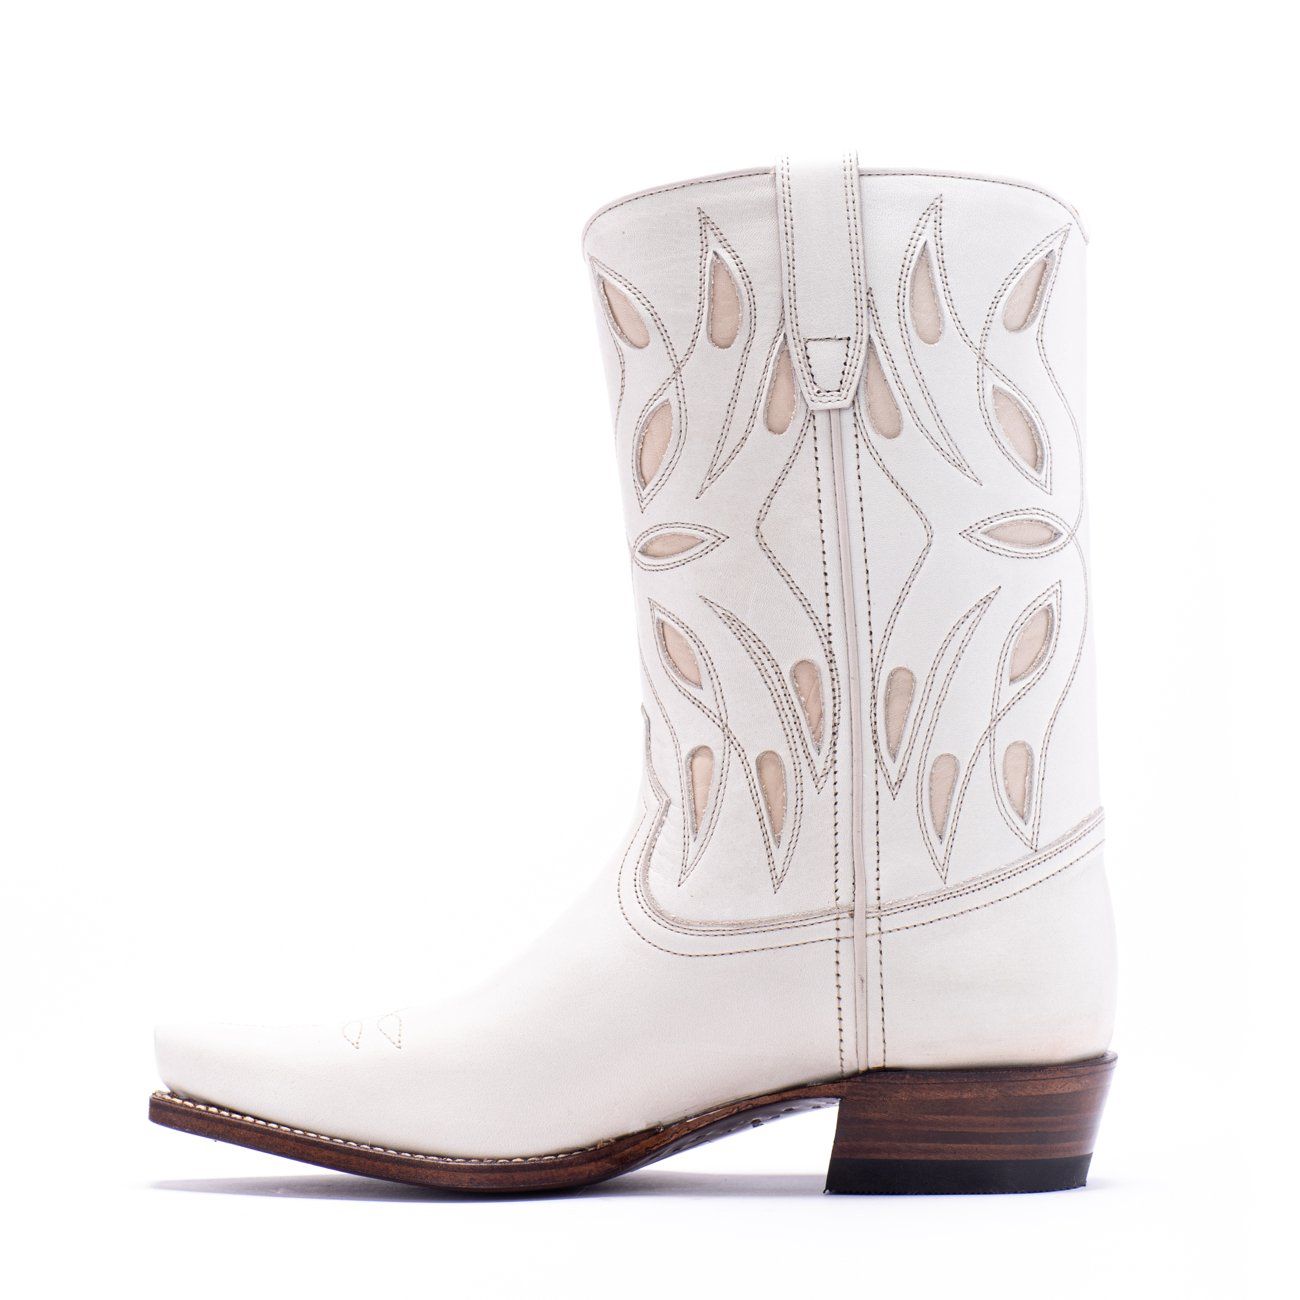 Womens Sagebrush White Leather Cowboy Boot - Ranch Road Boots™ Inner Side